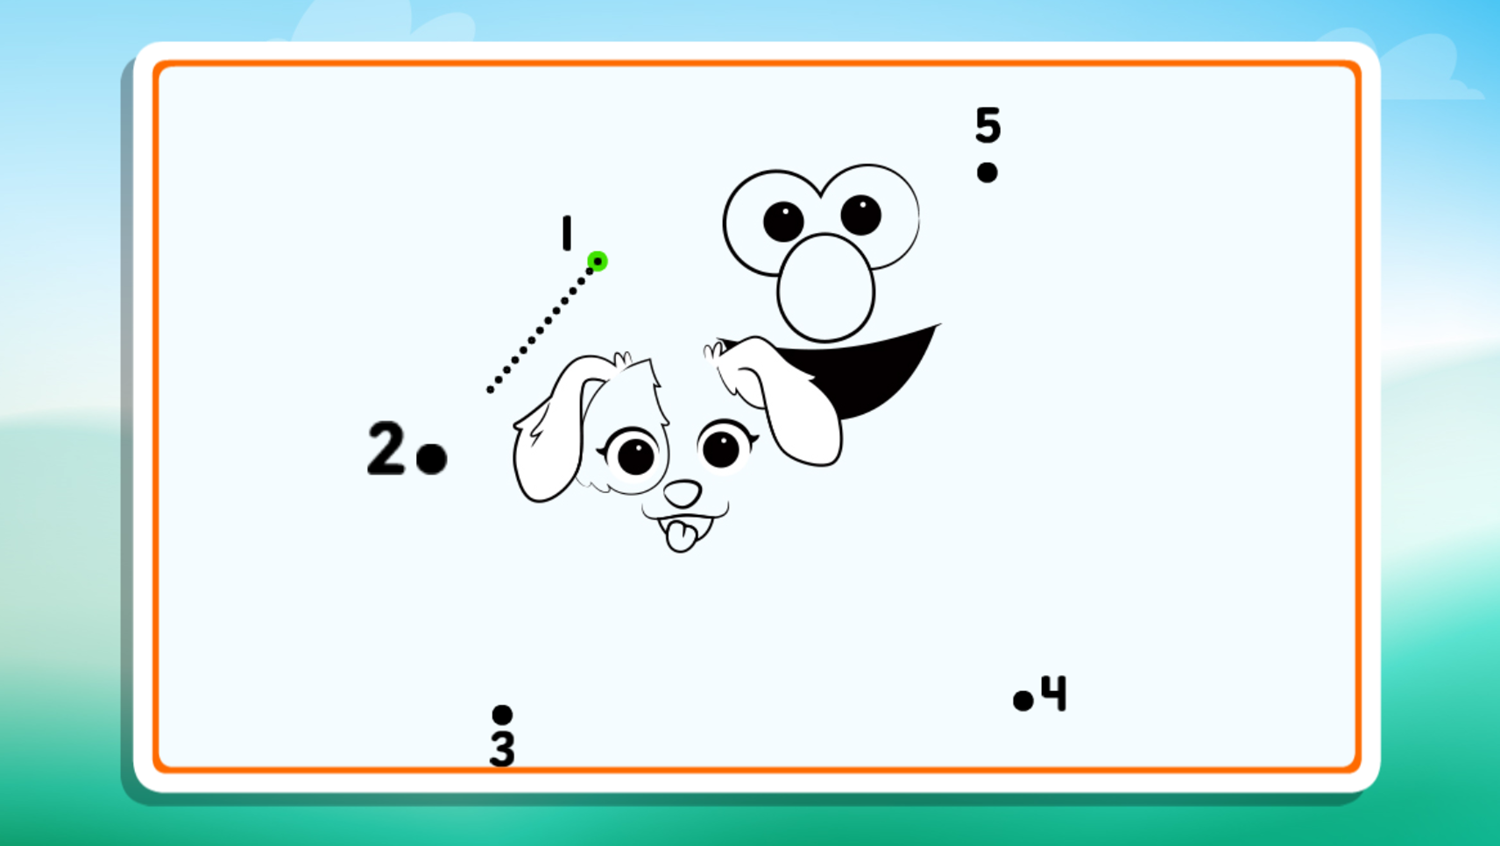 Sesame Street Furry Friends Forever Connect the Dots Game How To Play Screenshot.